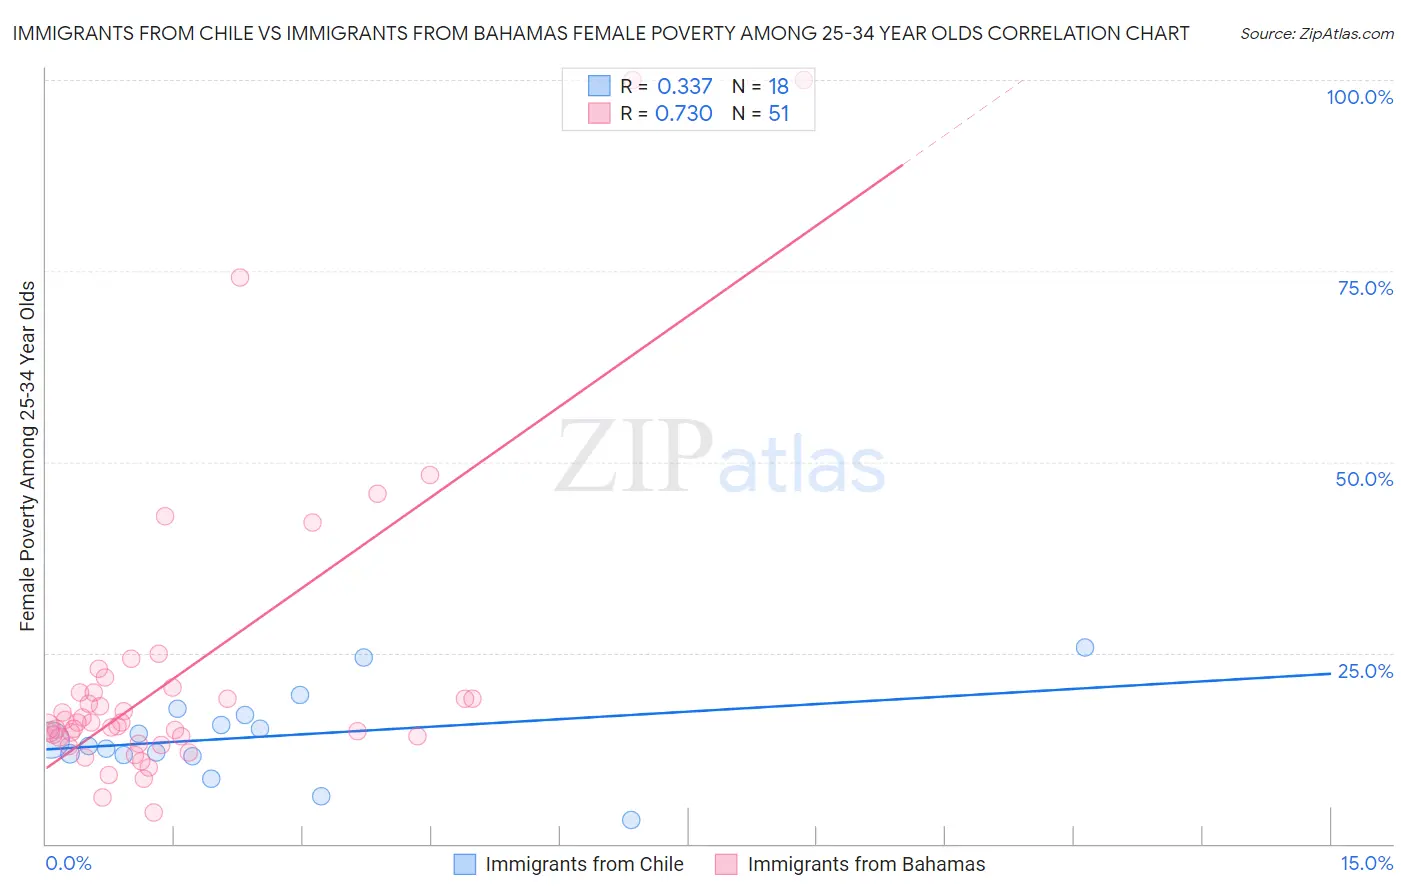 Immigrants from Chile vs Immigrants from Bahamas Female Poverty Among 25-34 Year Olds